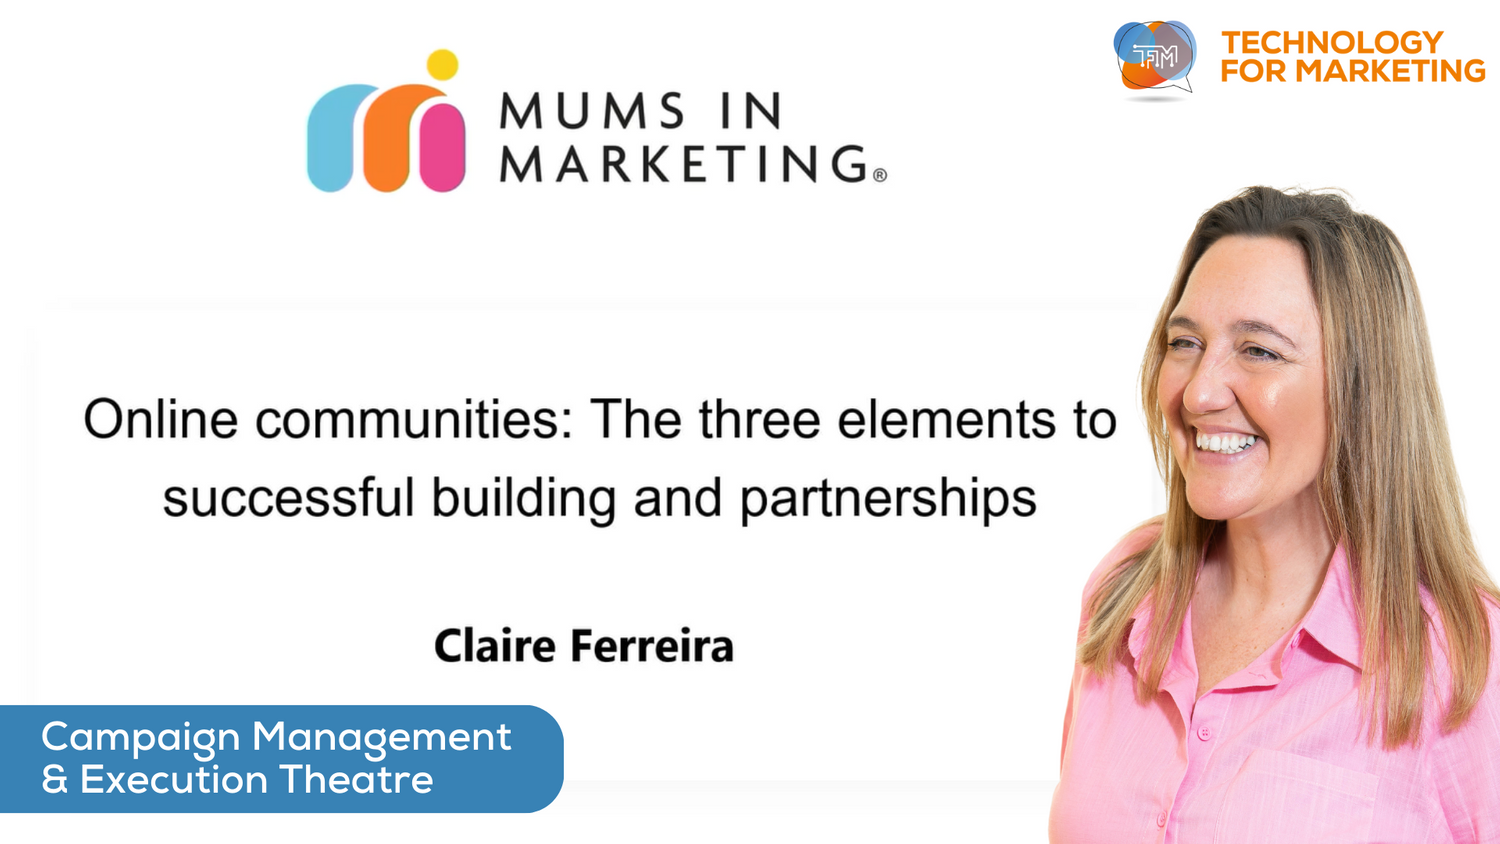 Online communities: 3 elements to successful building and partnerships